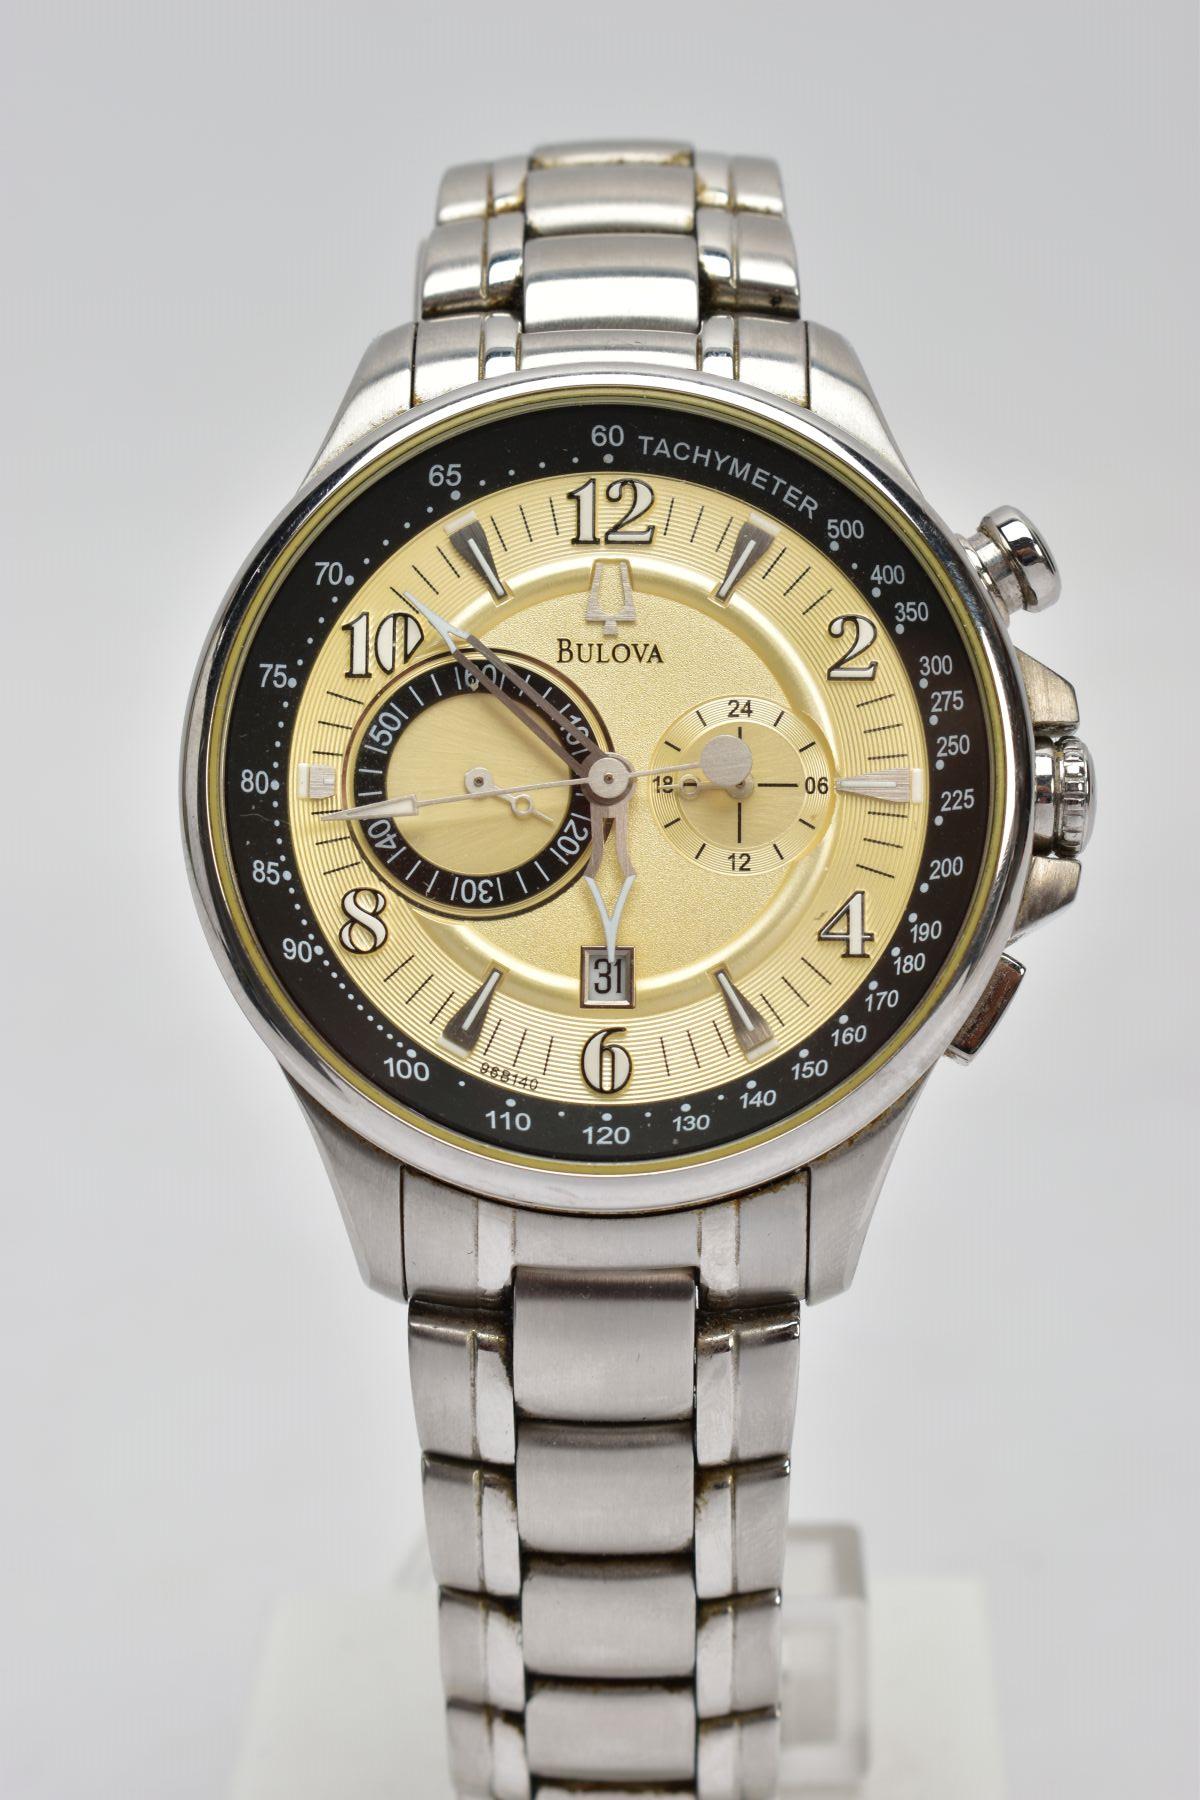 A GENTS 'BULOVA' CHRONOGRAPH WRISTWATCH, round gold dial signed 'Bulova', Arabic numerals and